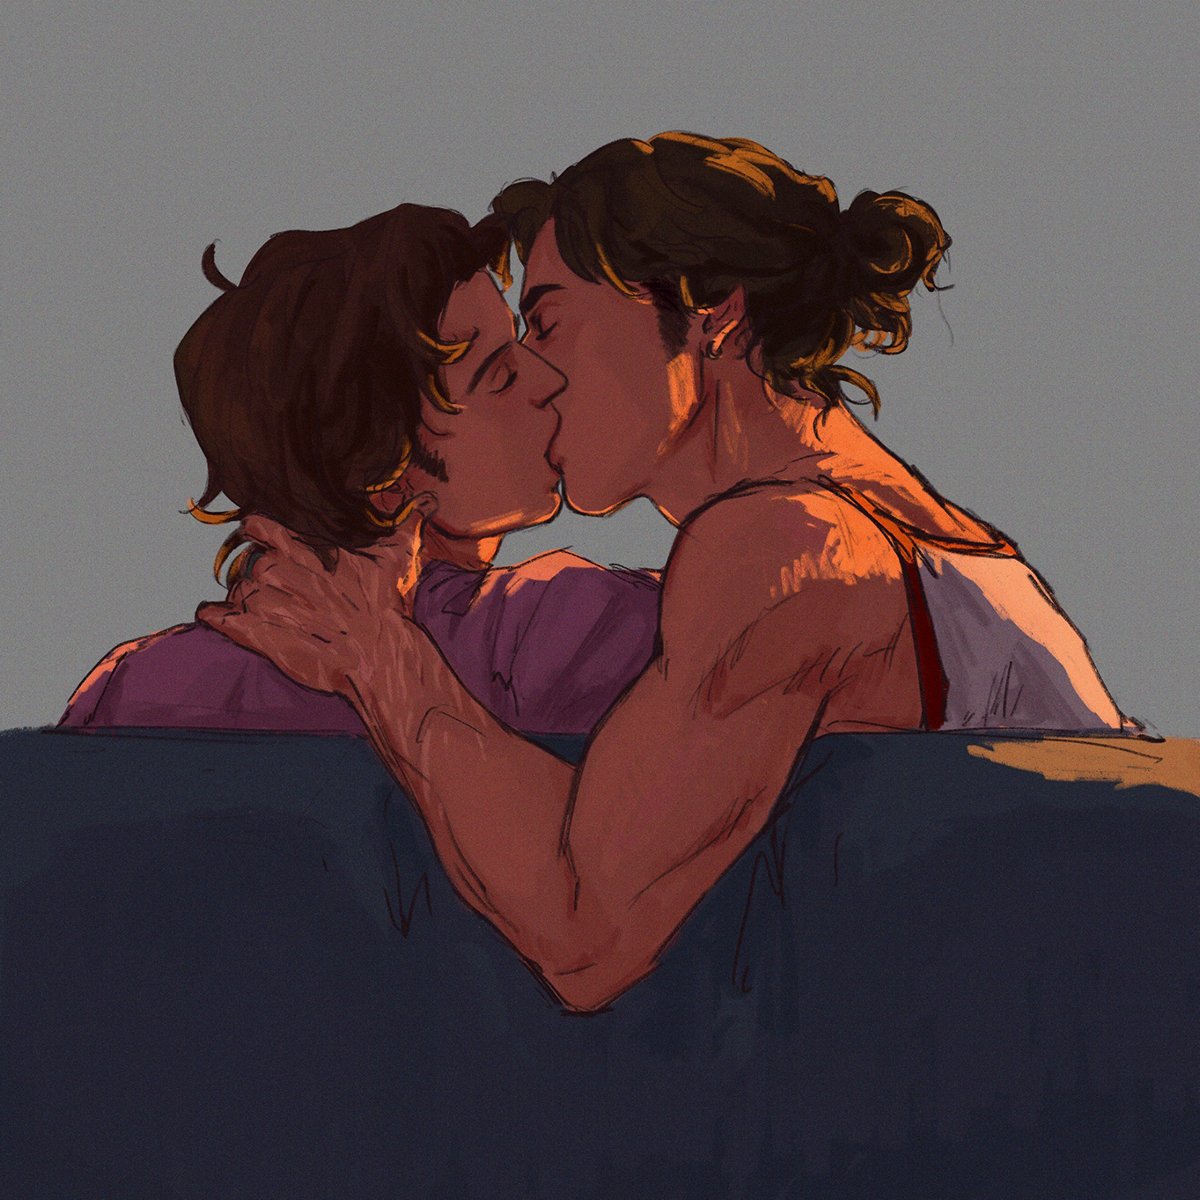 2019. #Harringrove. @wrecked_fuse. ɟ o x. and then they fuck --144. 